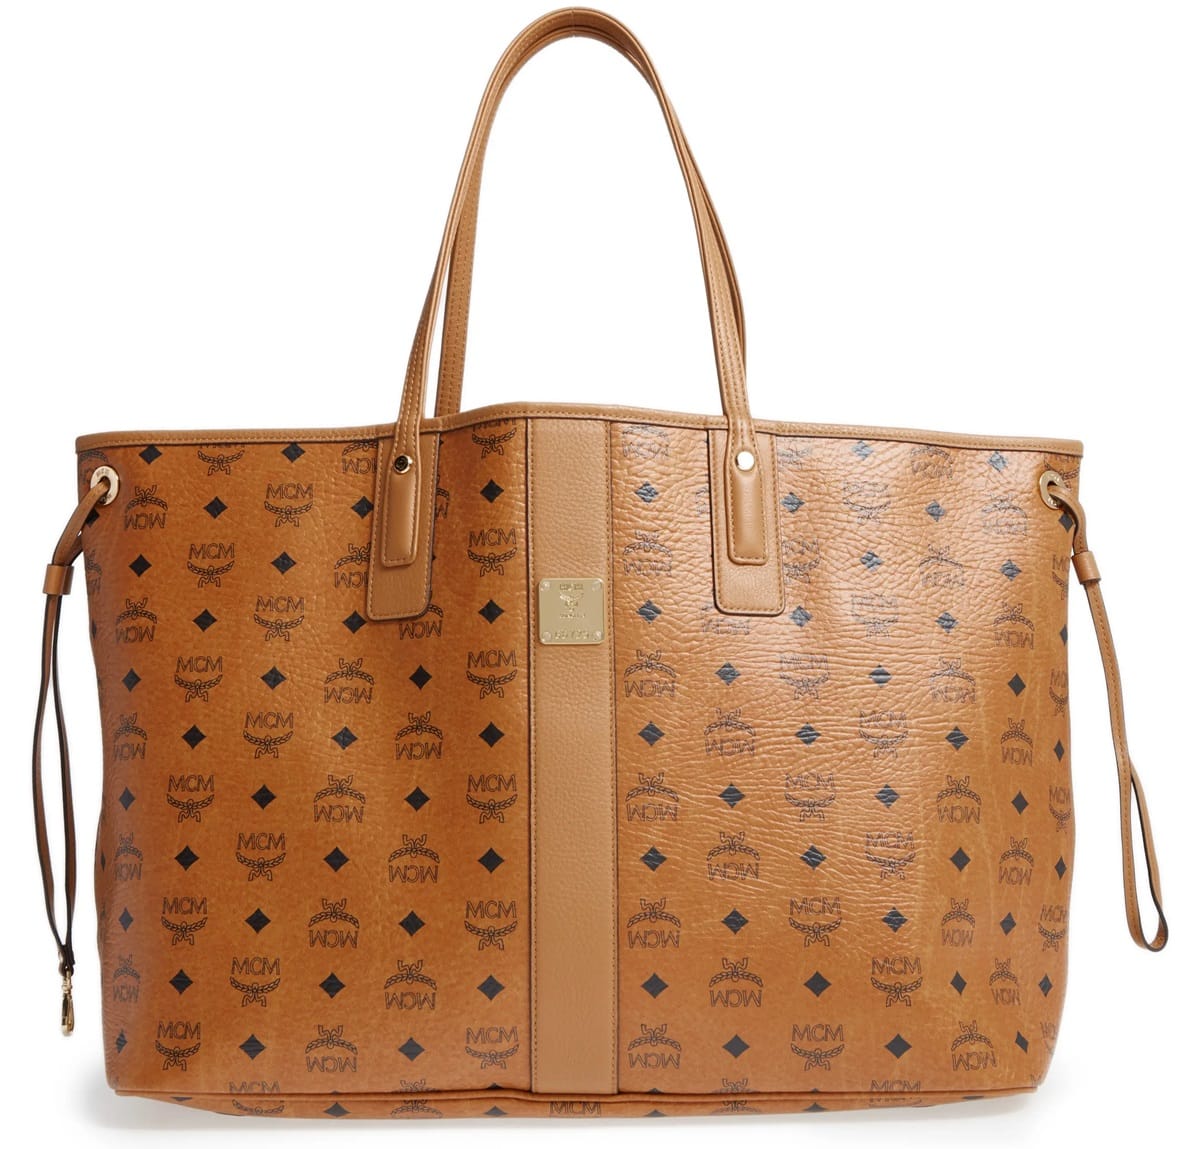 MCM bags are crafted in Korea and Italy using high-quality materials and craftsmanship